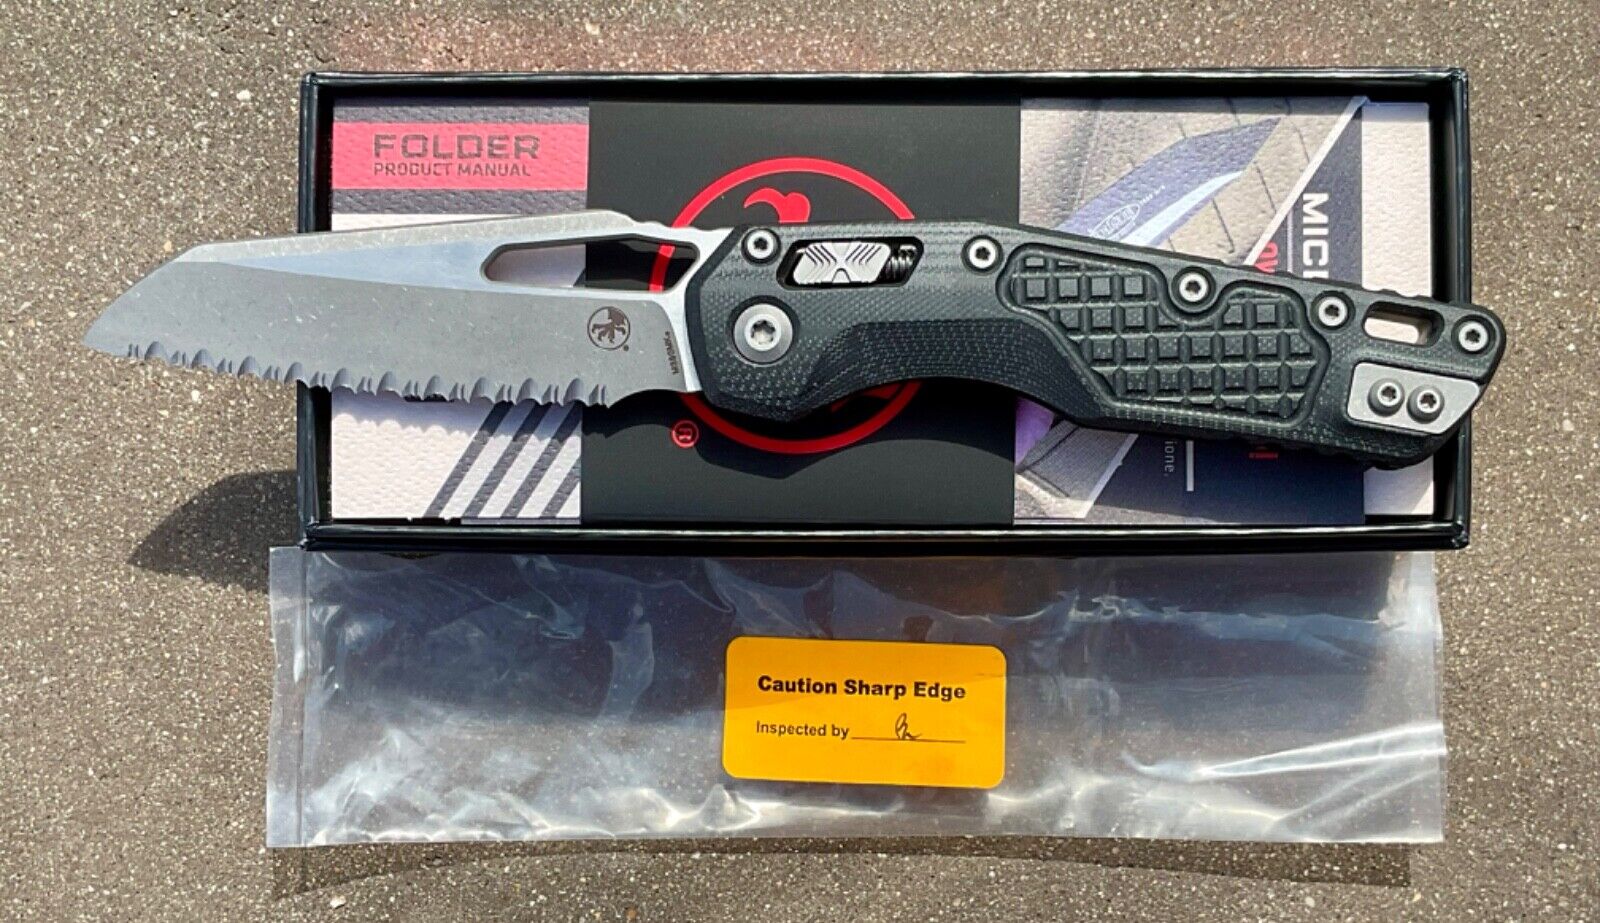 Microtech MSI Black Frag G-10 Grip with Apocalyptic Full Serrated Blade